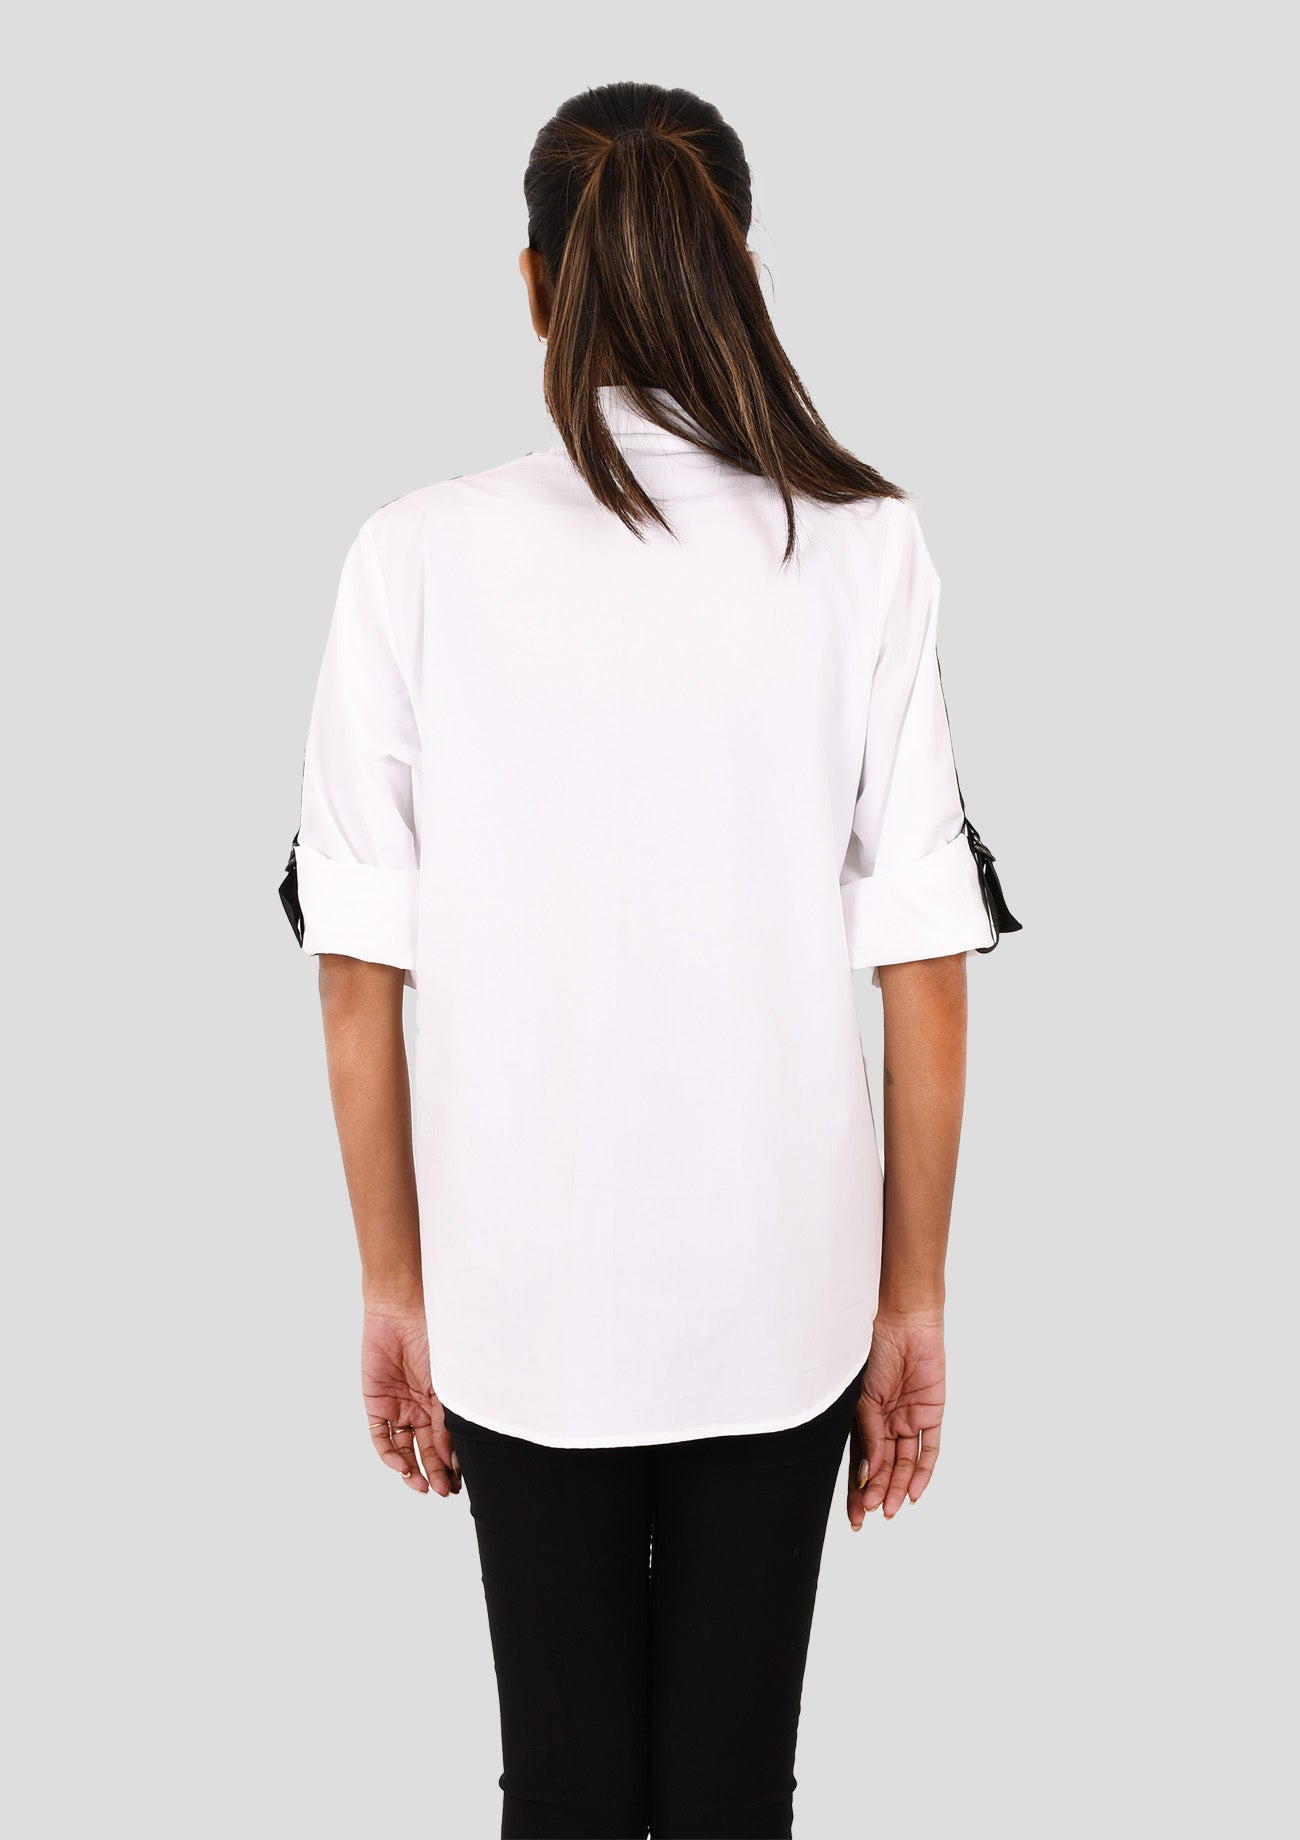 White Cotton Shirt With Eyelet Pockets And Black Tape